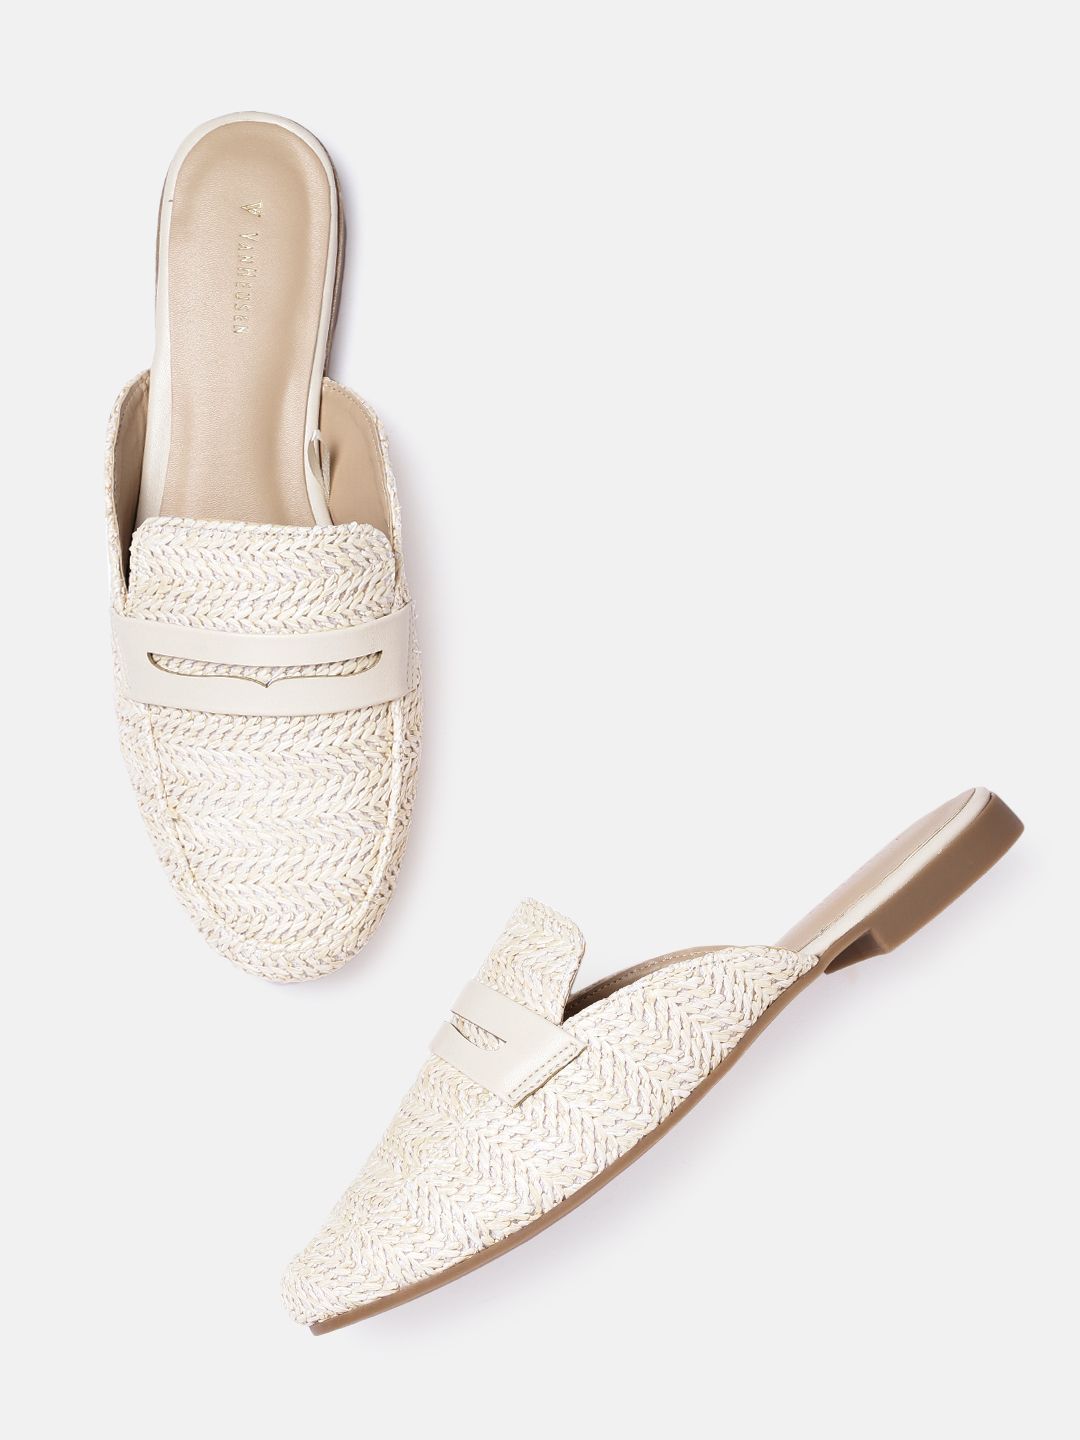 Van Heusen Woman Off White Woven Design Mules Price in India